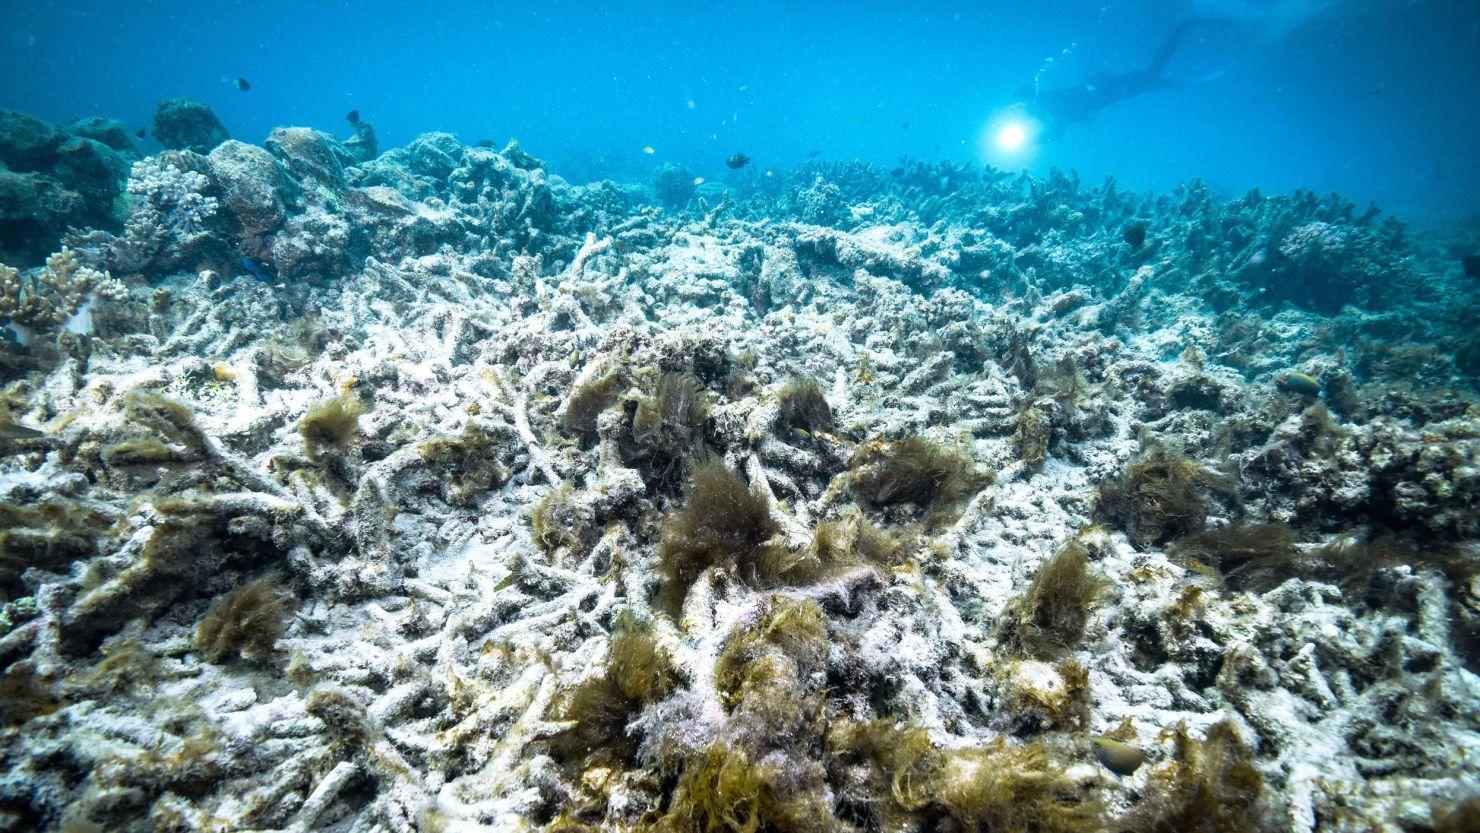 How climate change impacts the Great Barrier Reef tourism industry